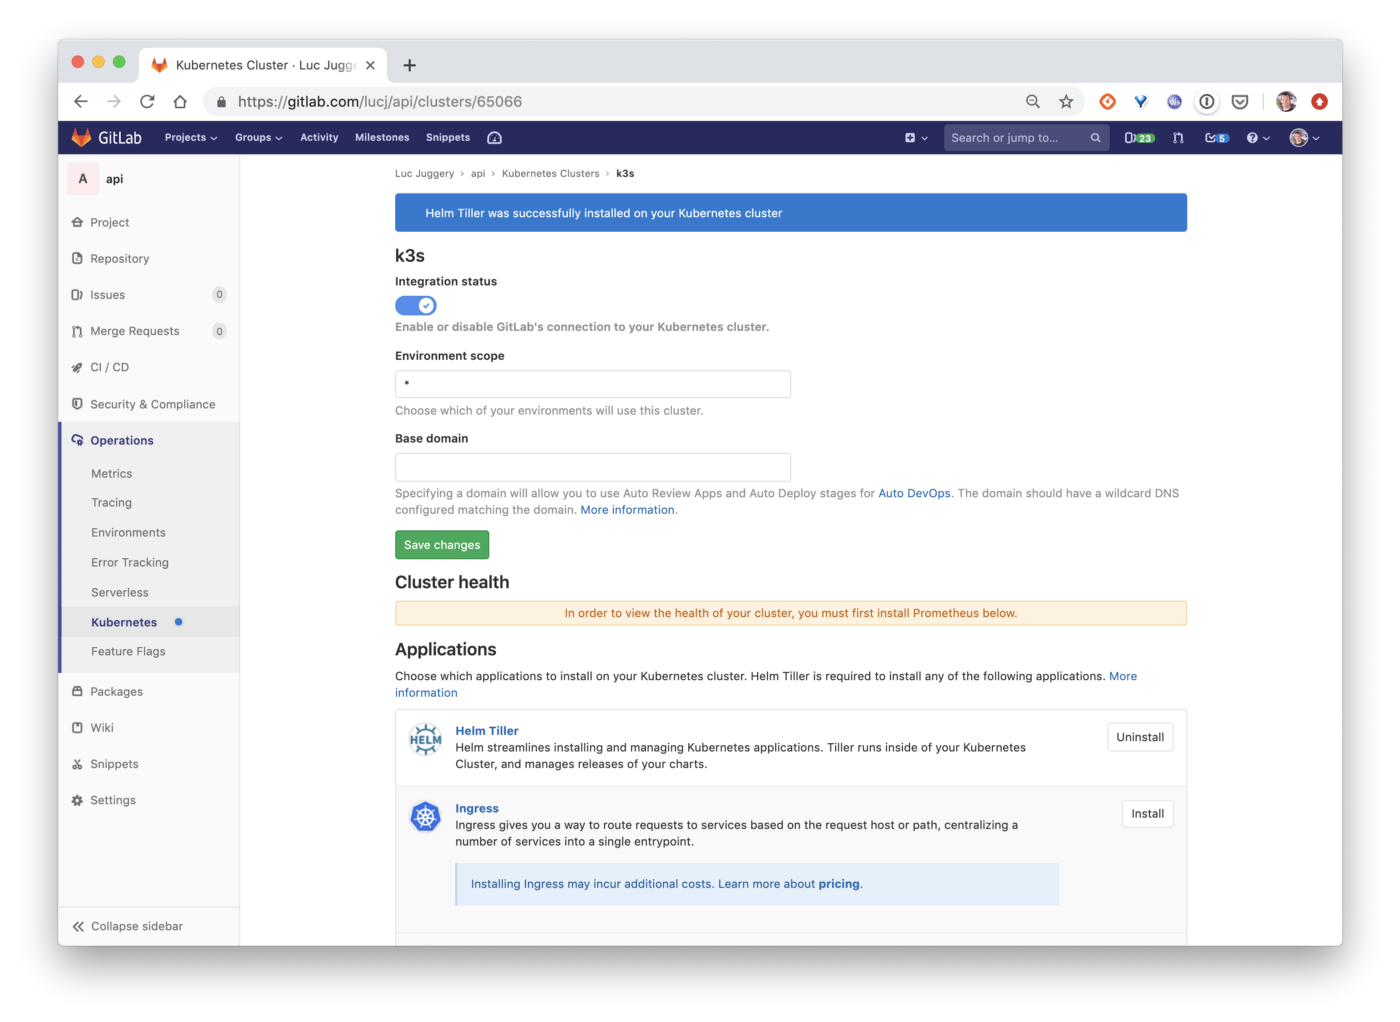 content/wechat/articles/2020/05/2020-05-06-using-a-k3s-kubernetes-cluster-for-your-gitlab-project/install-helm-2.png